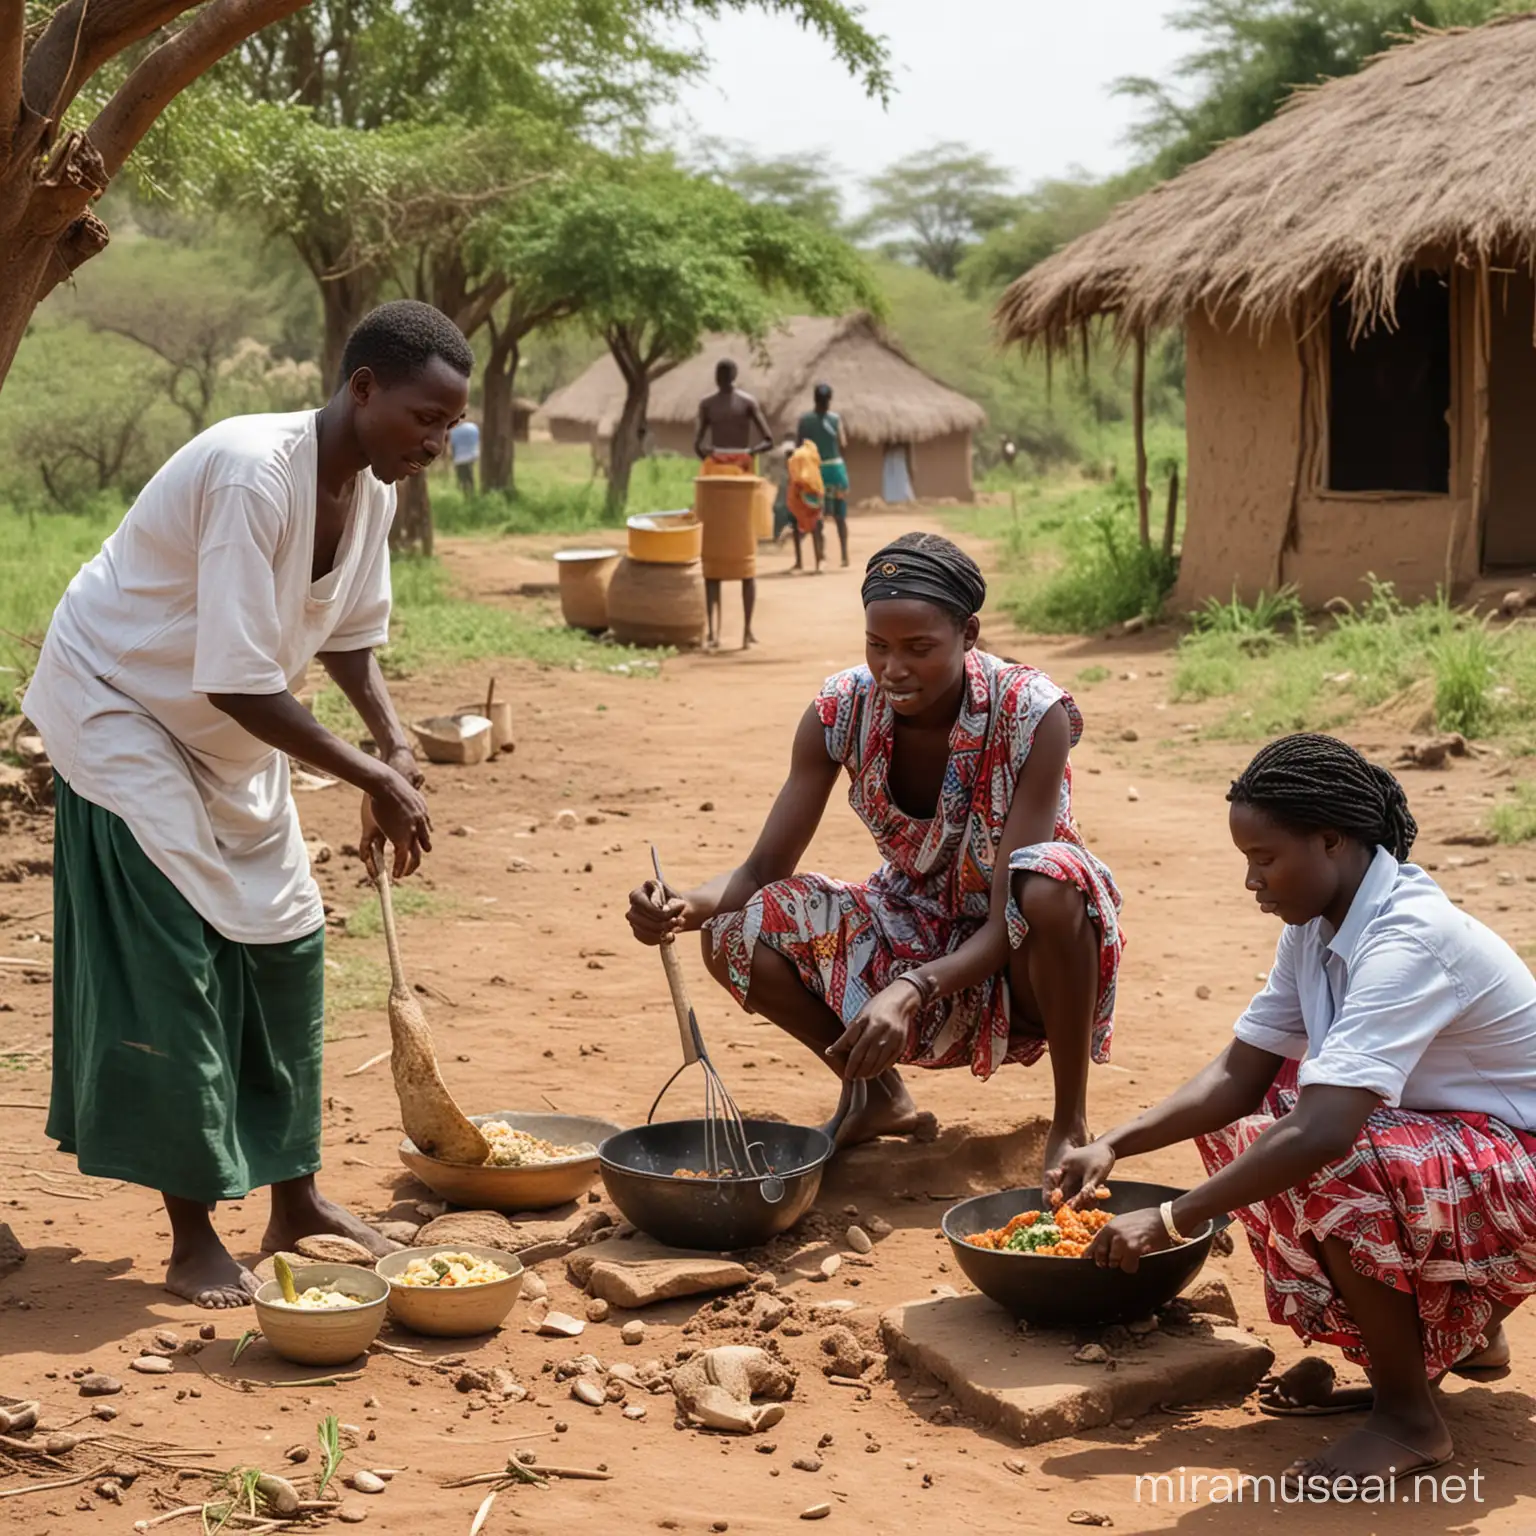 east africans cooking in their village, show others helping to prepare the meal, show village